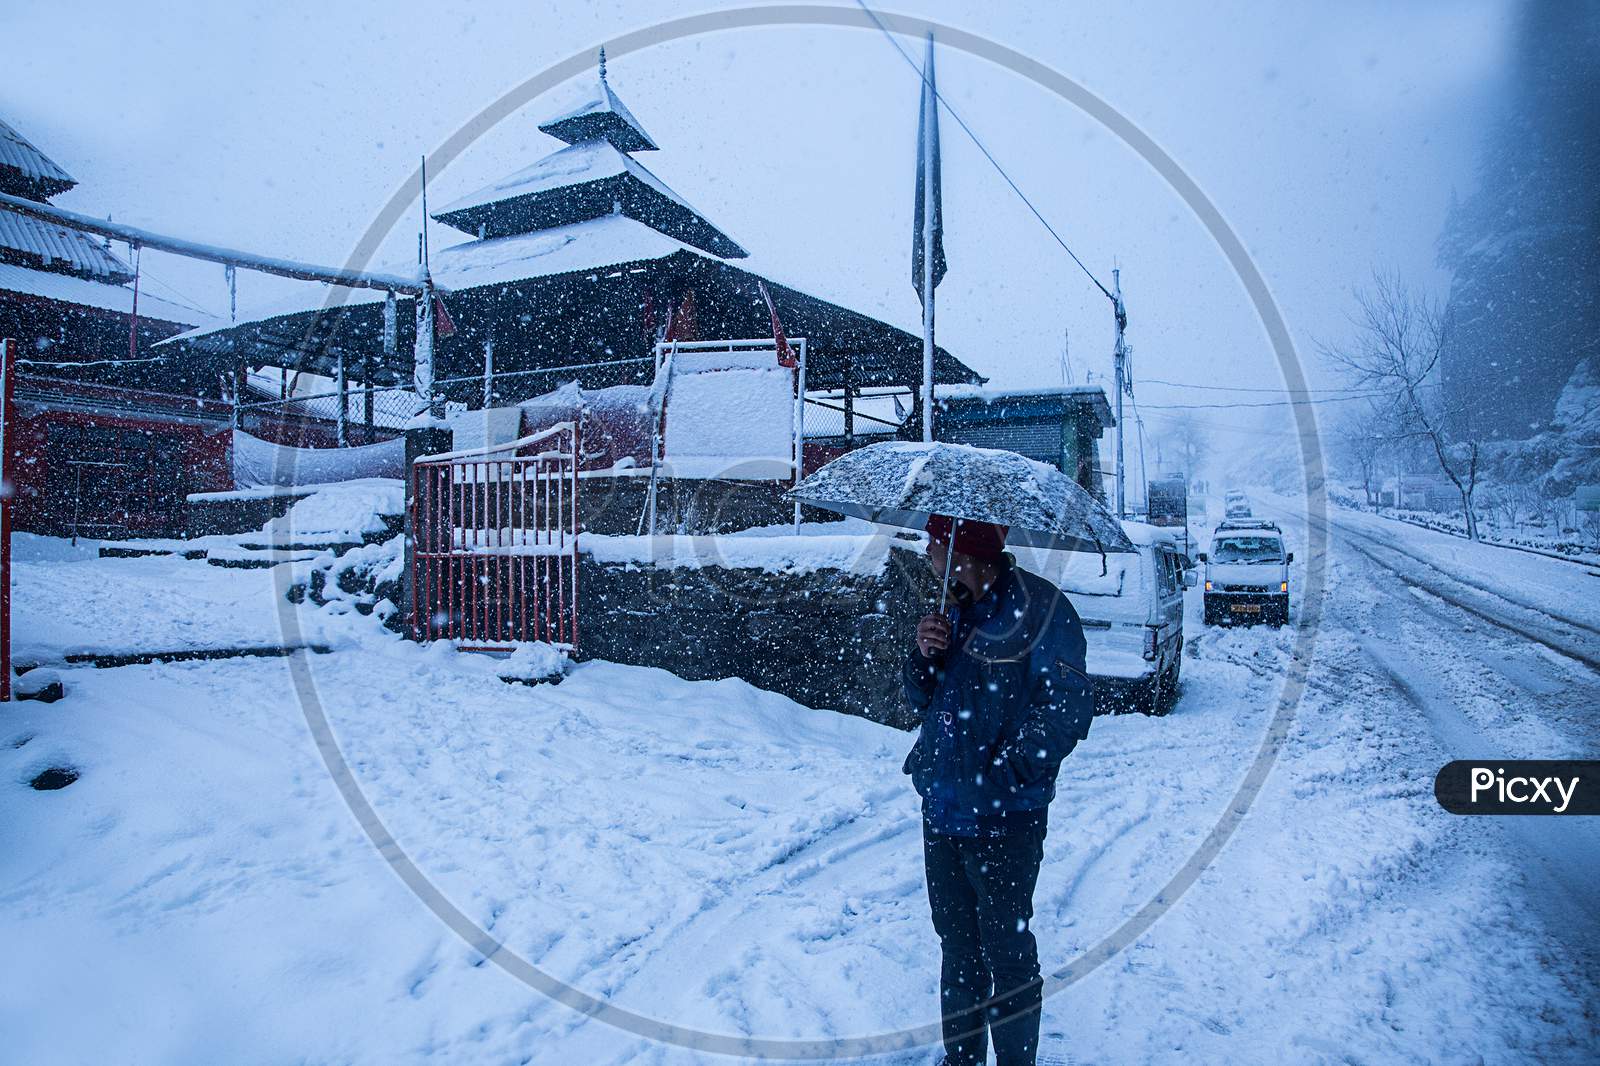 Manali, India - Jan 22, 2019: Old Wooden Temple Covered With Snow,, Man With Umbrella Winter Snowfall In Himalaya - Image